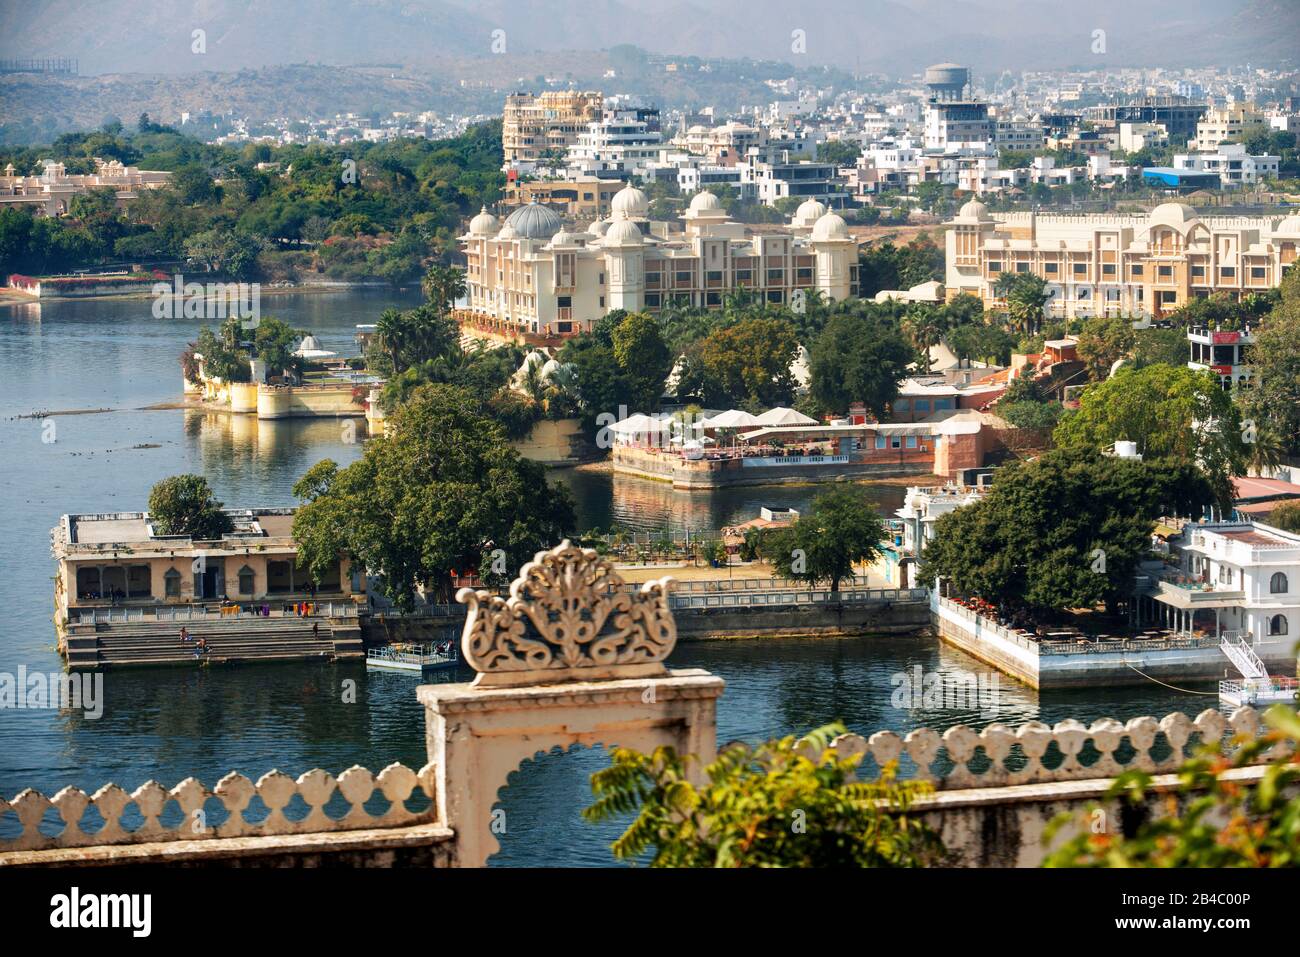 Lake pichola and Udaipur city from Udaipur City Palace museum in Udaipur, Rajasthan, India. This is one of the excursion of the Luxury train Maharajas Stock Photo